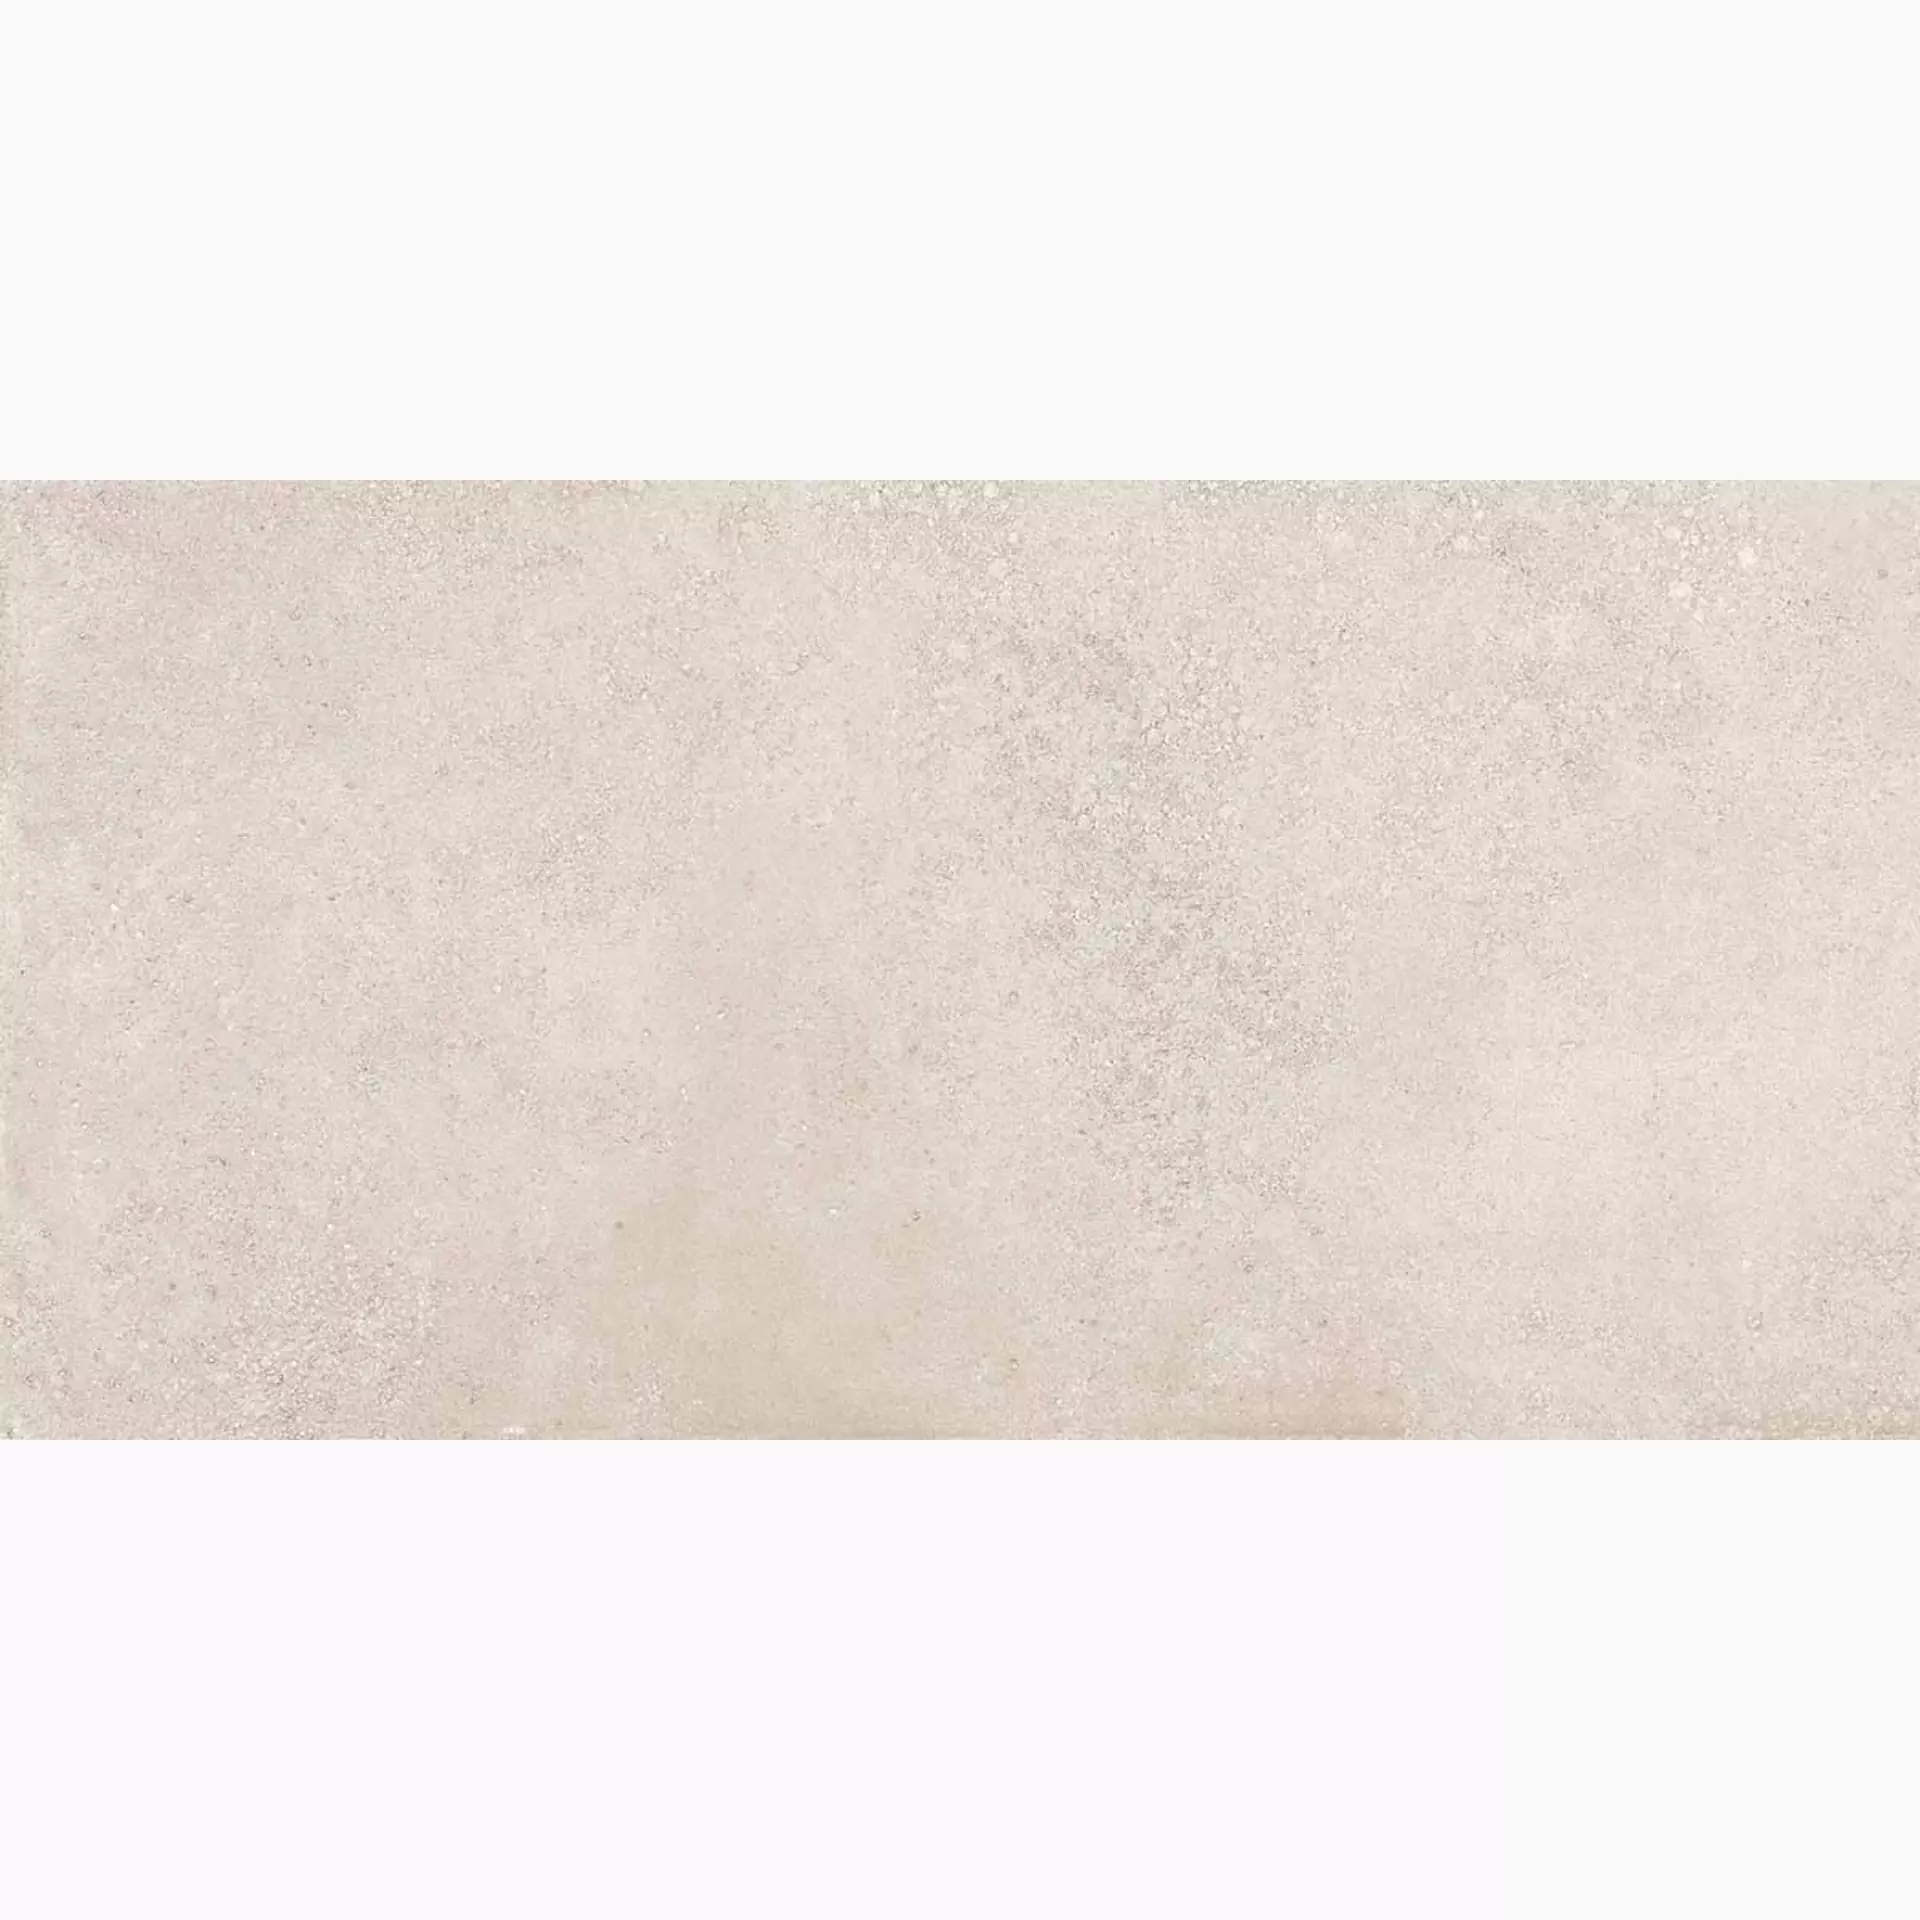 Keope Geo White Strutturato 4931484A 30x60cm rectified 9mm